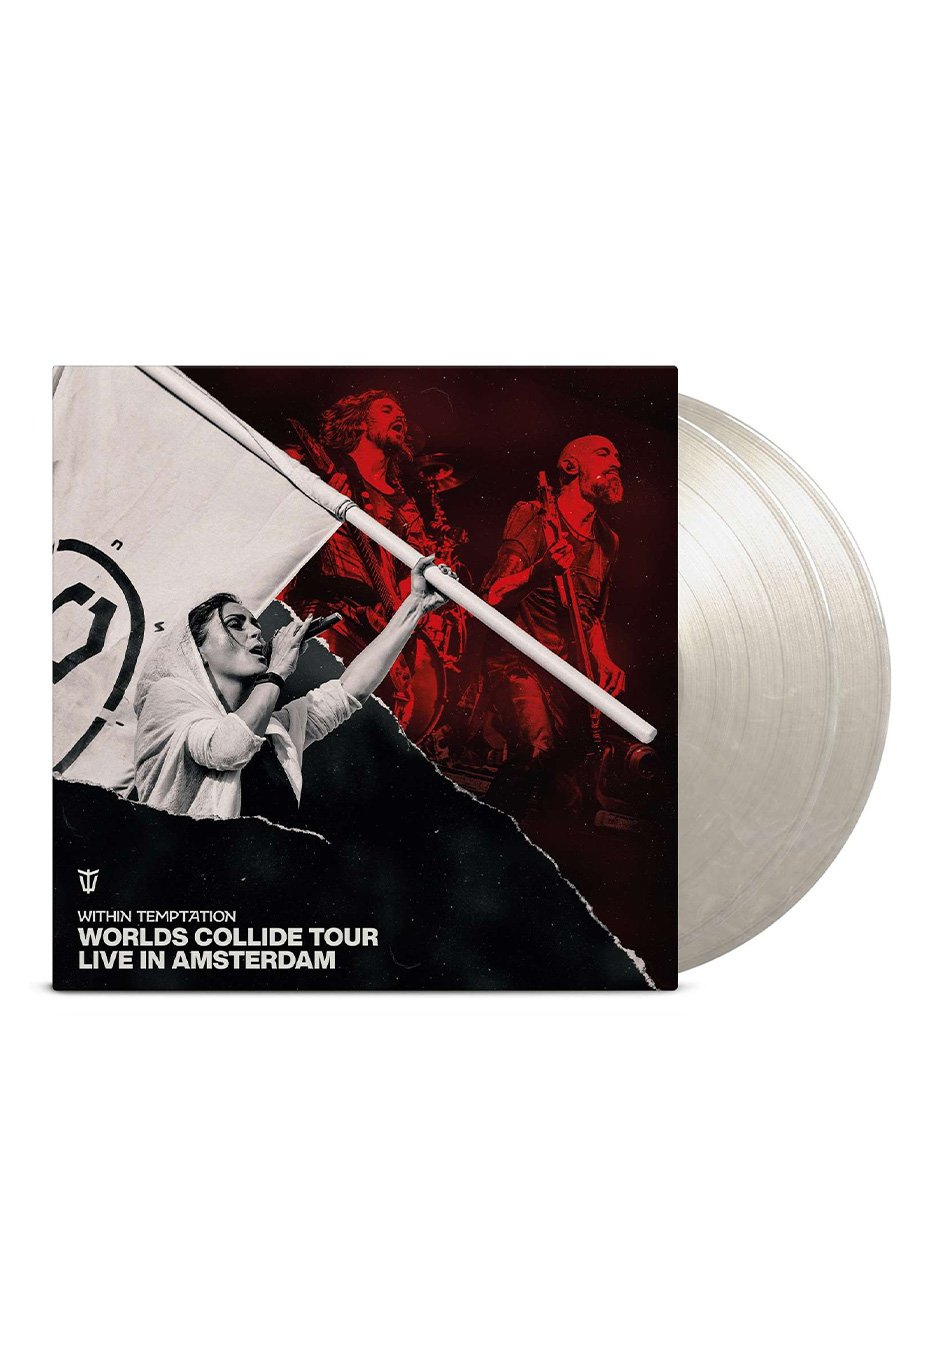 Within Temptation - Worlds Collide Tour Live In Amsterdam Ltd. White - Colored 2 Vinyl